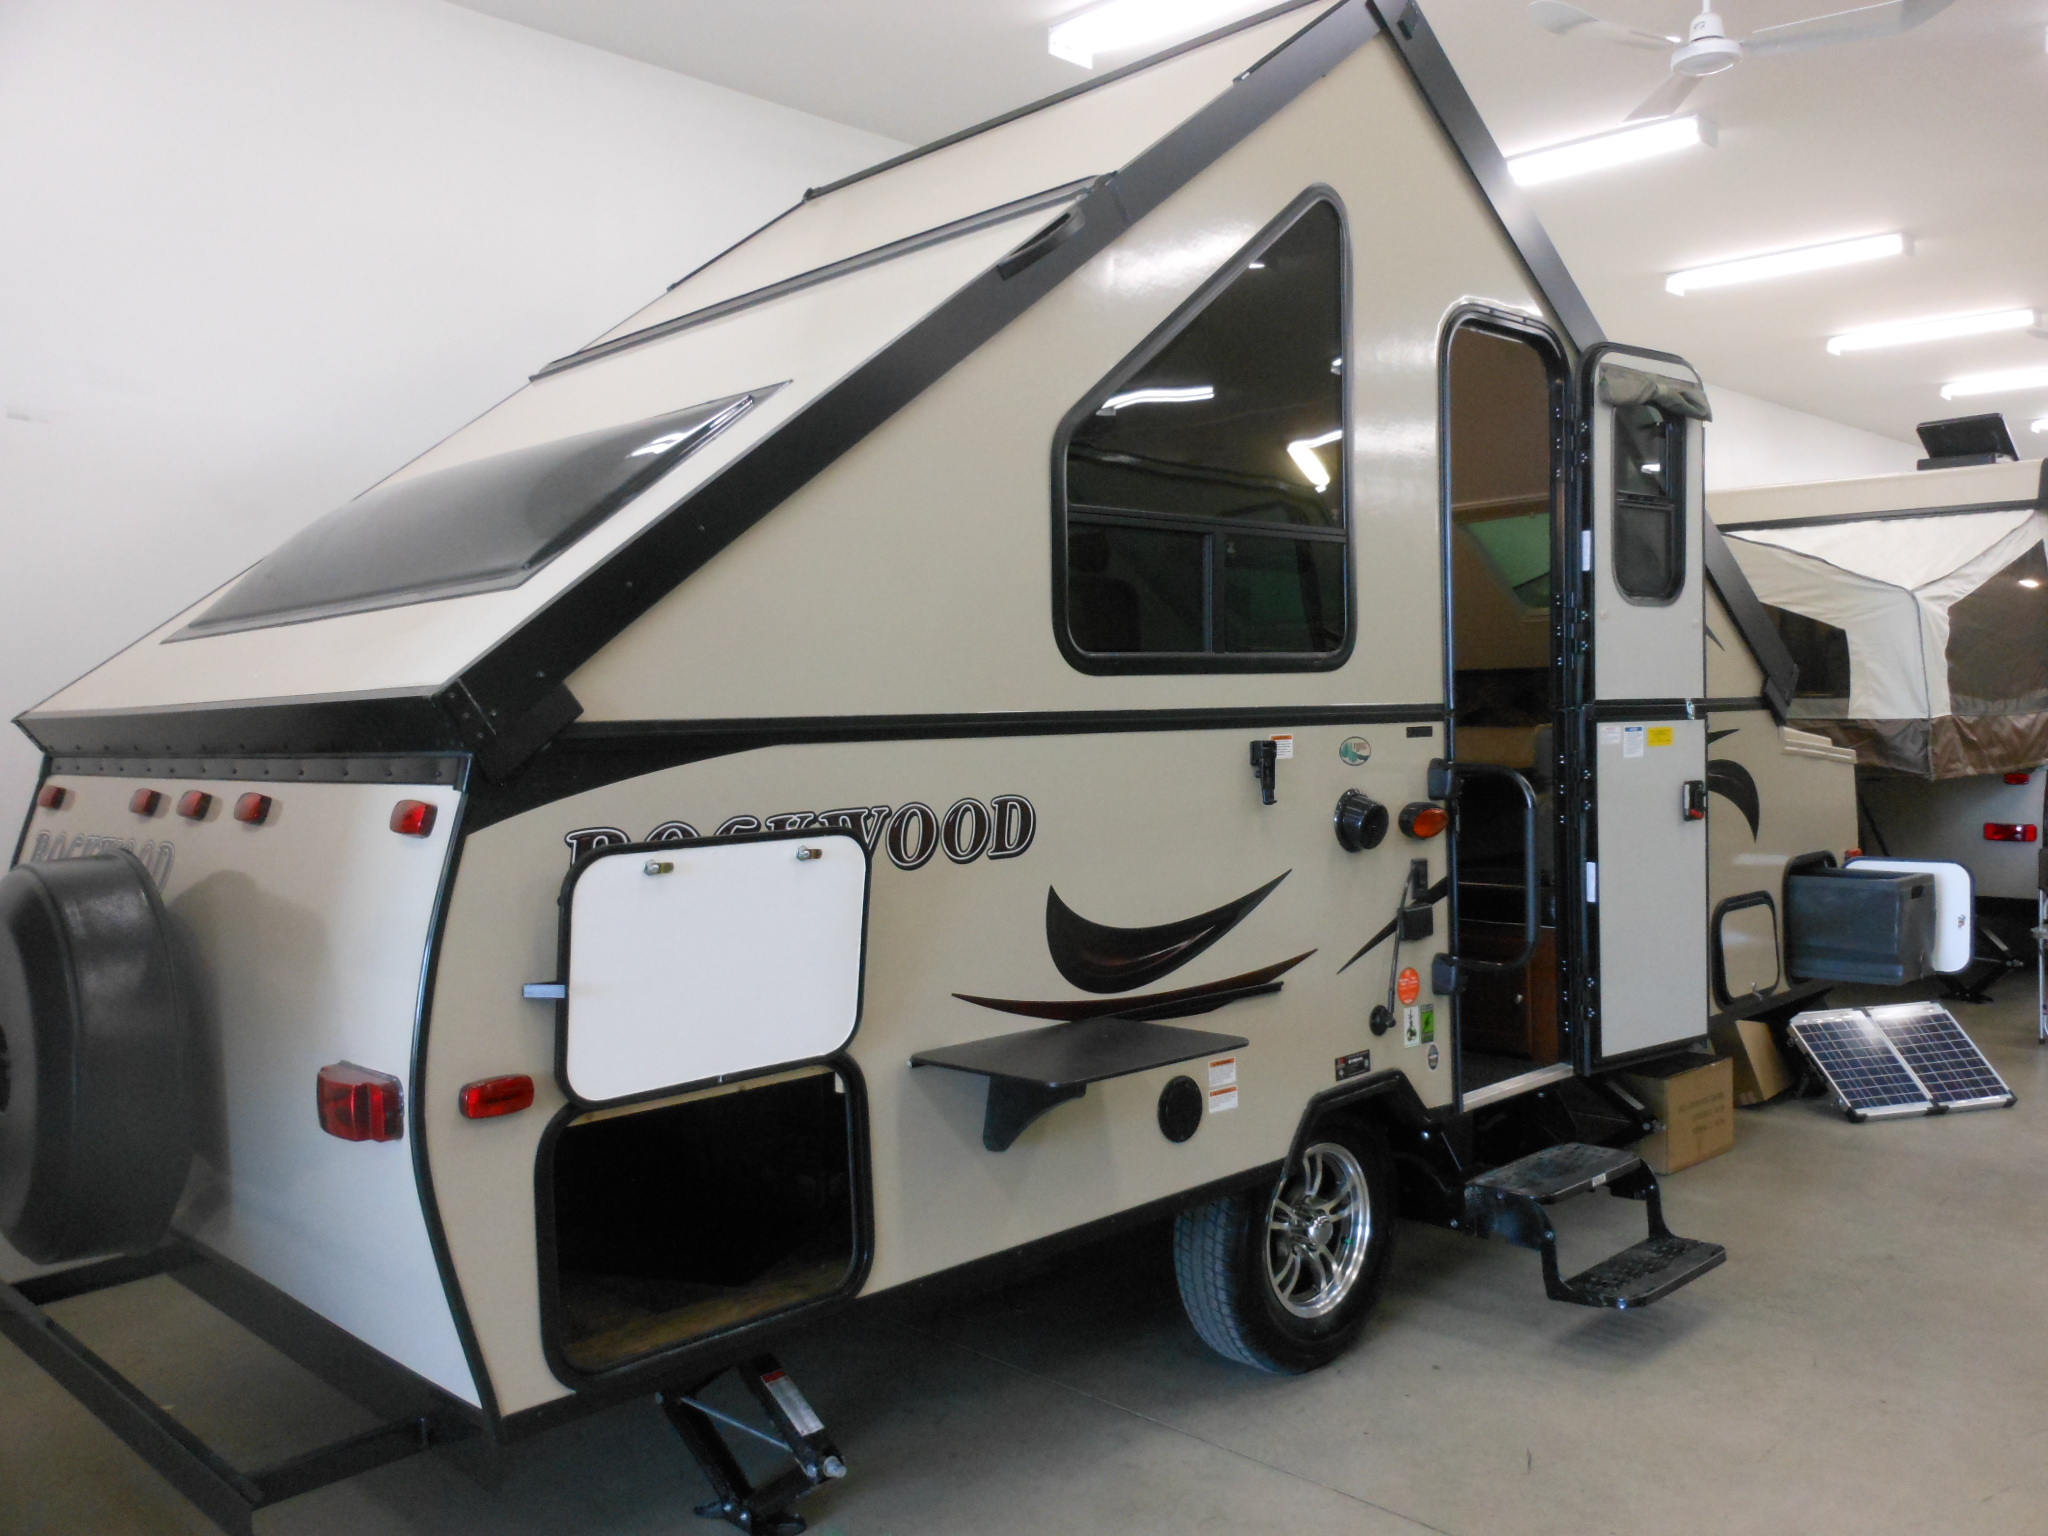 Can you purchase pop-up campers from an online dealer?